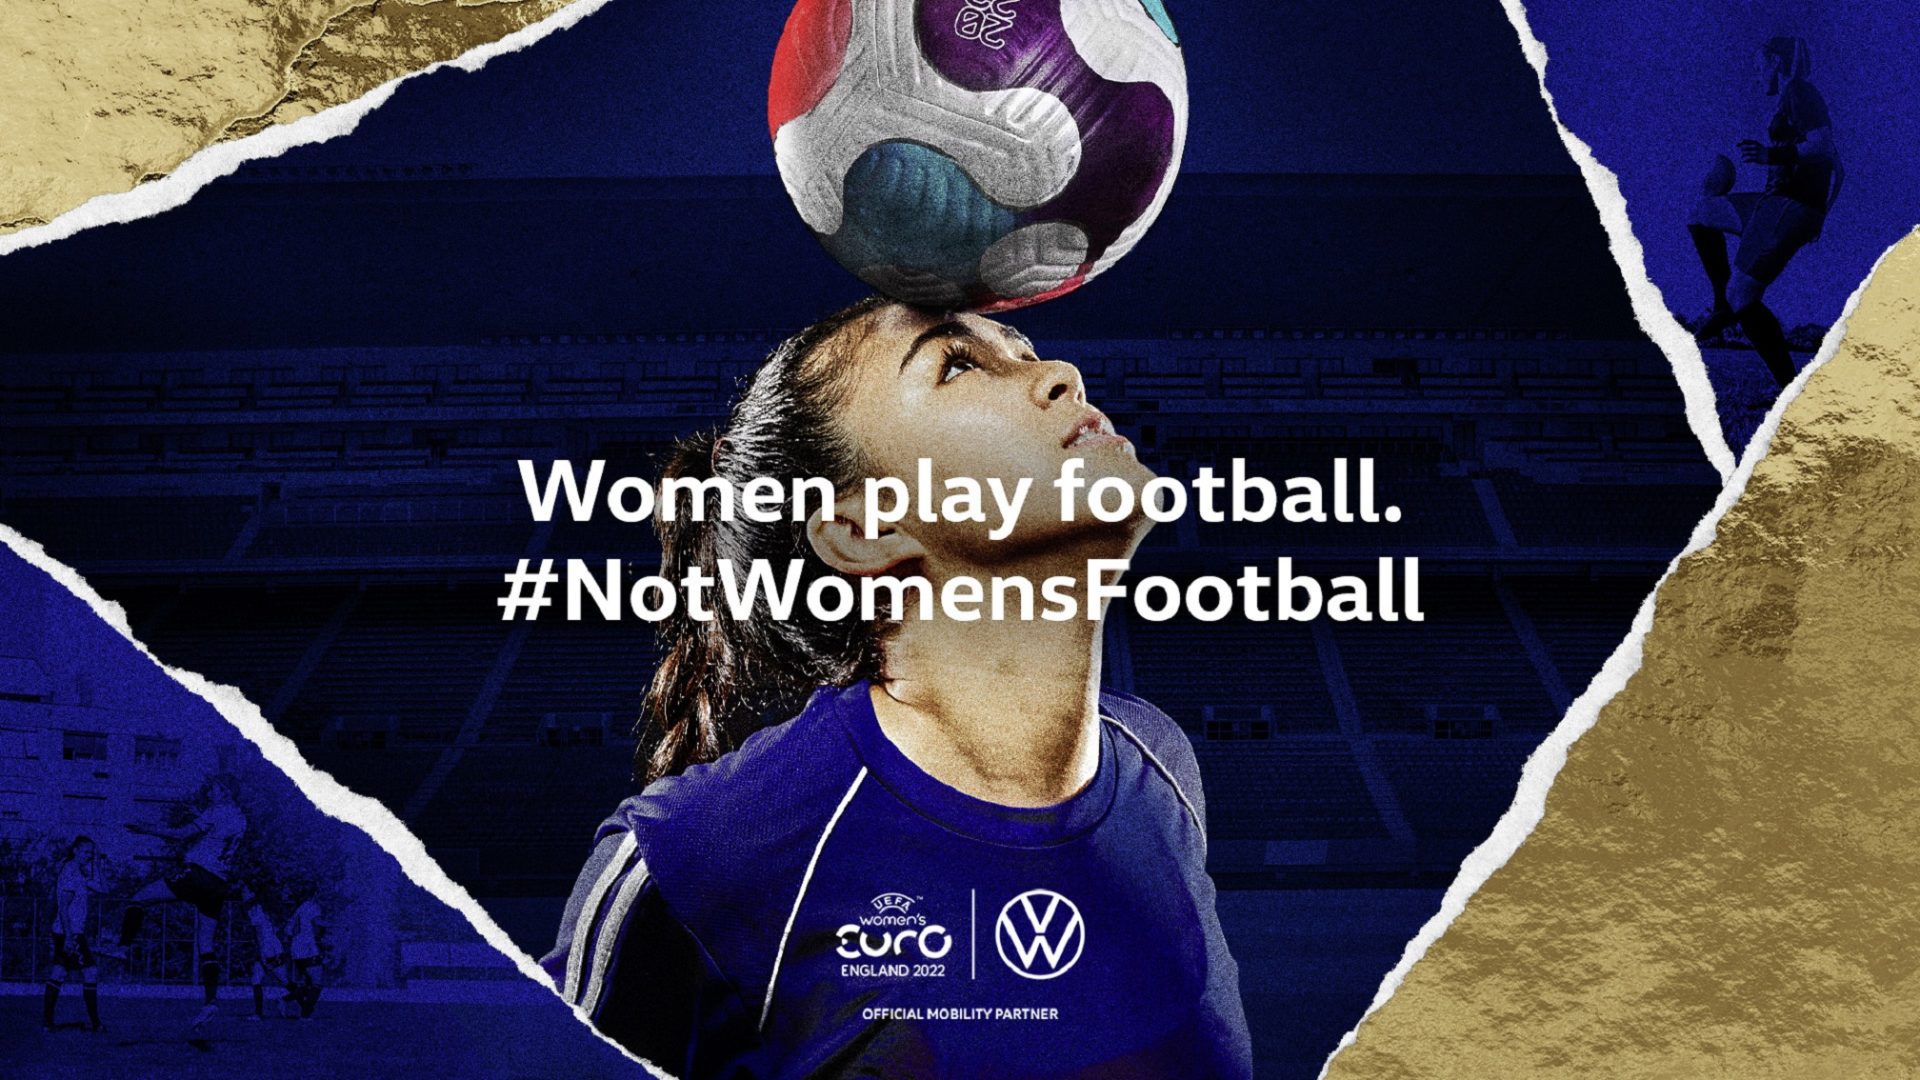 Volkswagen Women play football photo 2 <br>#NotWomensFootball : Volkswagen campaign to strengthen gender equality